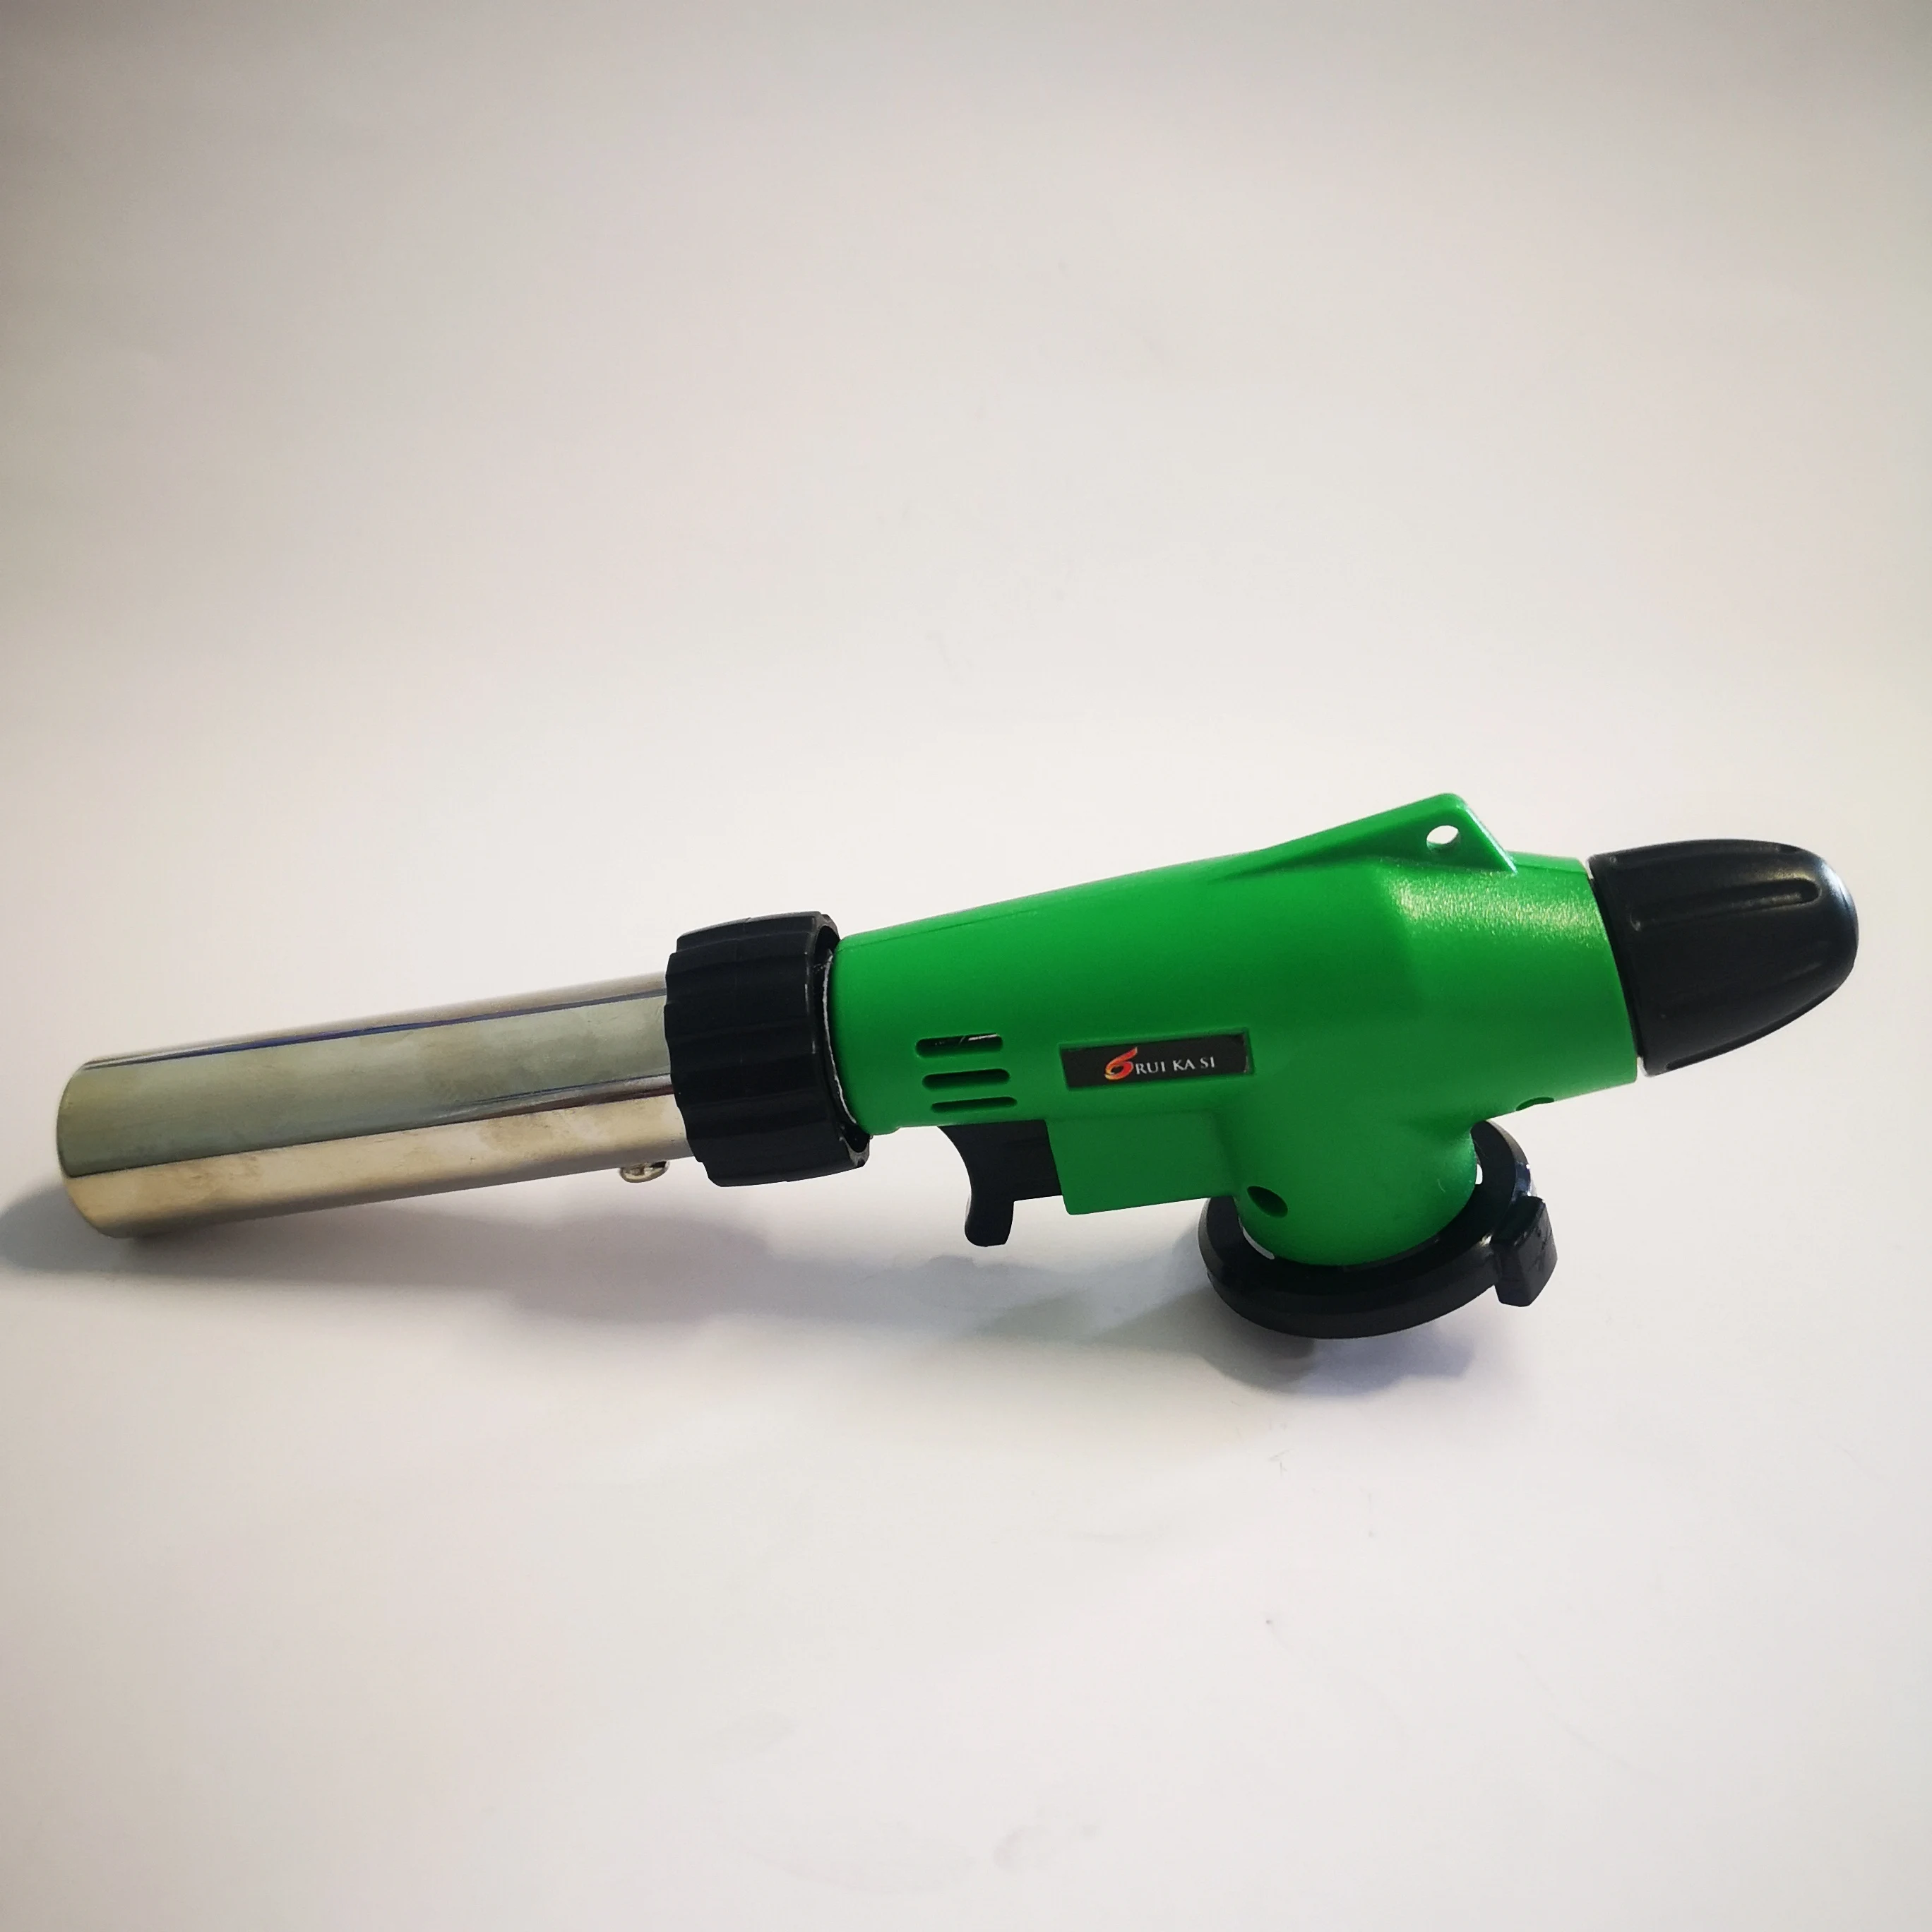 Brand New Cooking Welding Gas Homeuse Reversible Butane Blow Torch Flame Gun Manufacturer With High Quality